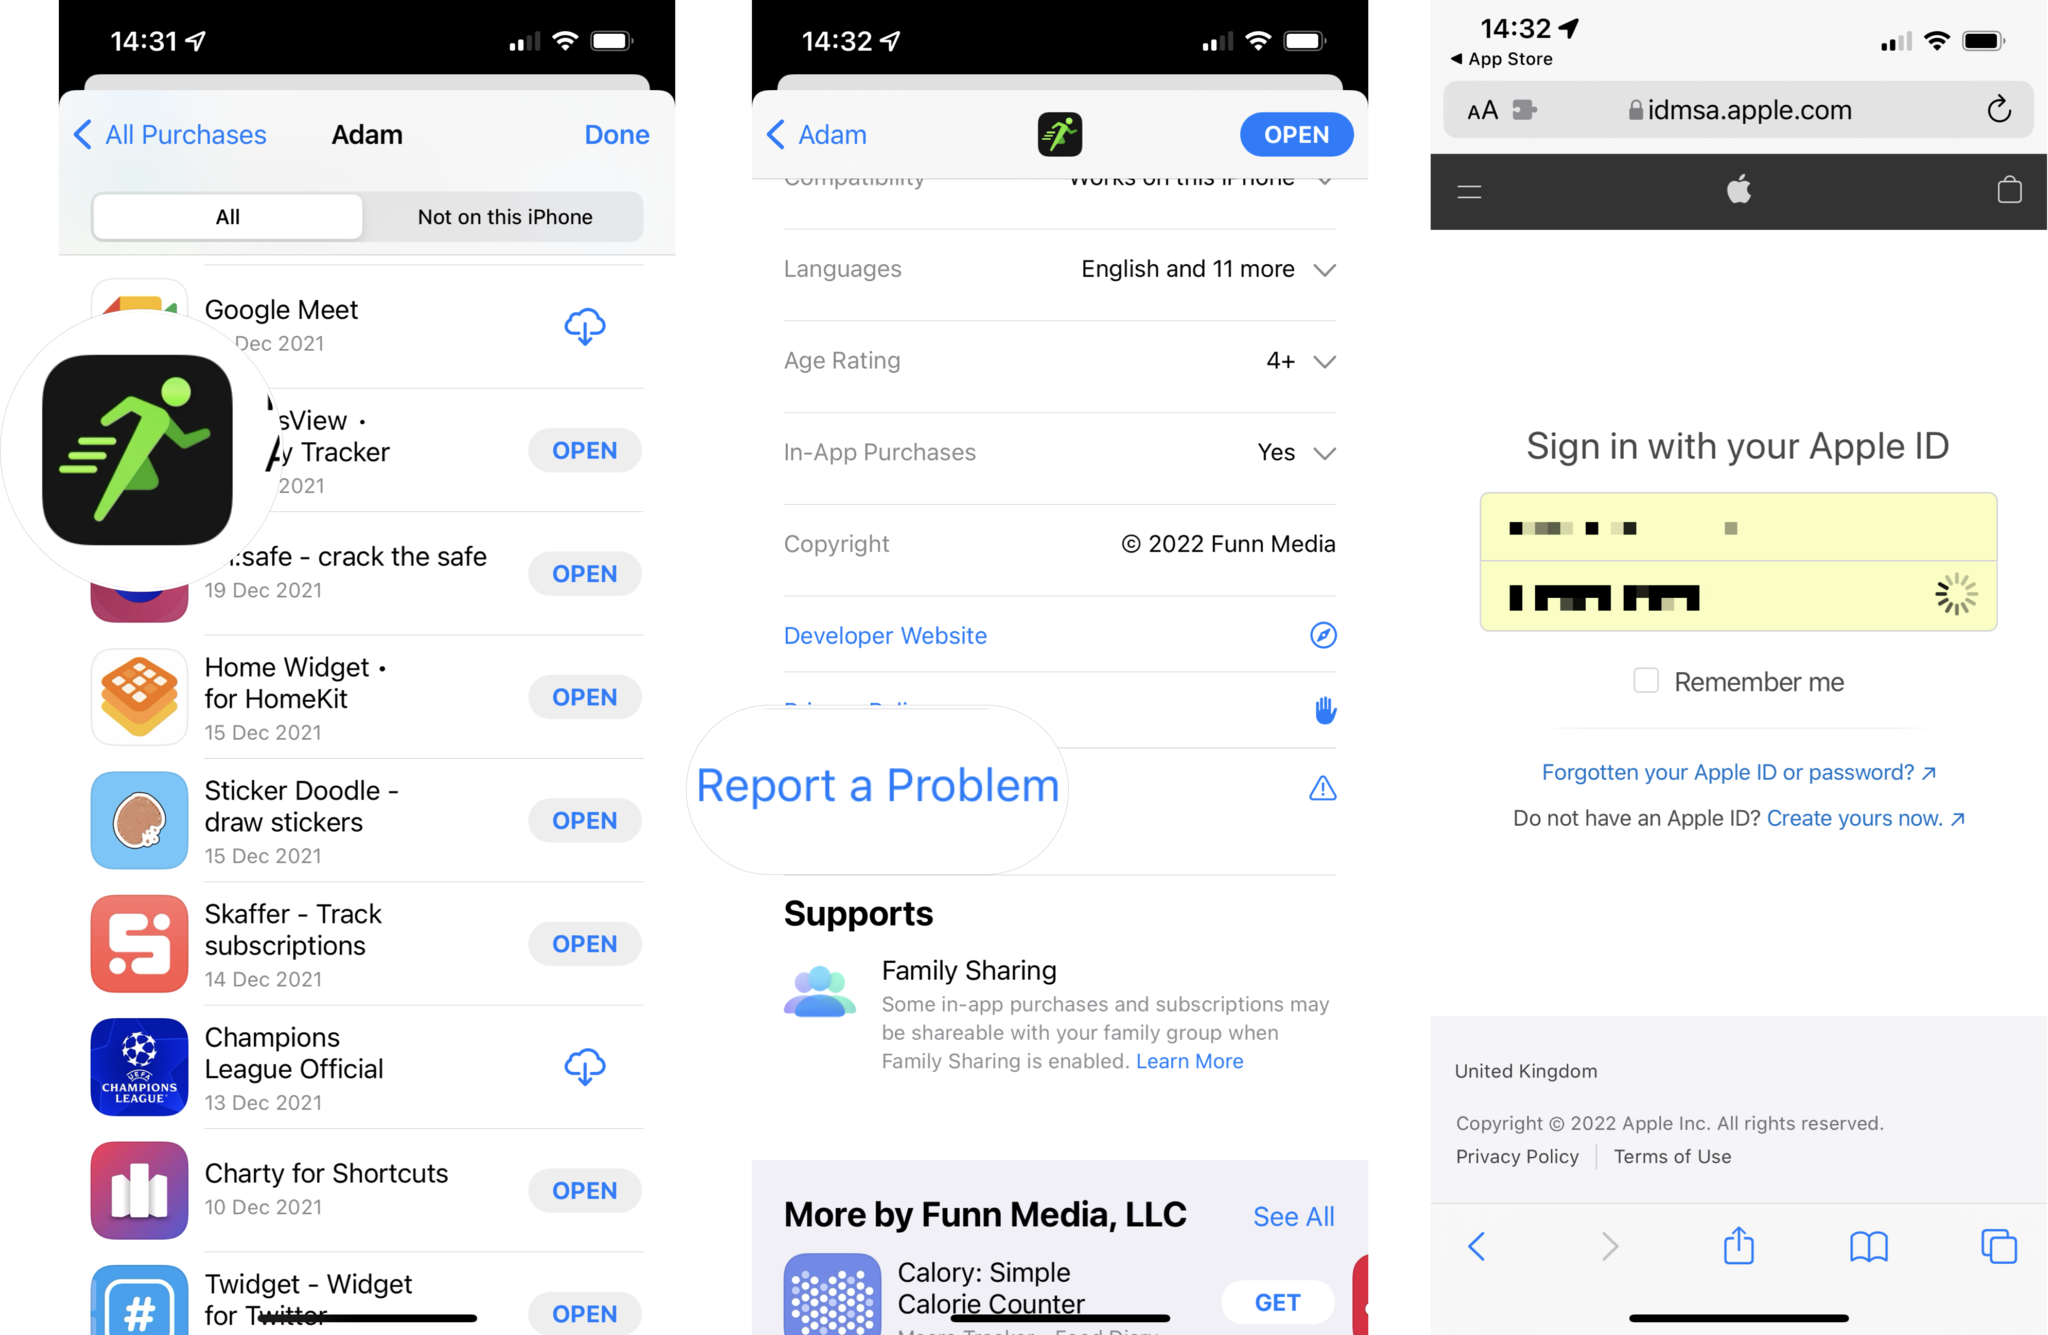 How to get an iTunes or App Store refund on iPhone or iPad: Tap on the app you want to claim a refund for, scroll its app listing and tap Report a Problem. You'll then be taken to Apple's refund site in Safari. Sign in with your Apple ID and Password.